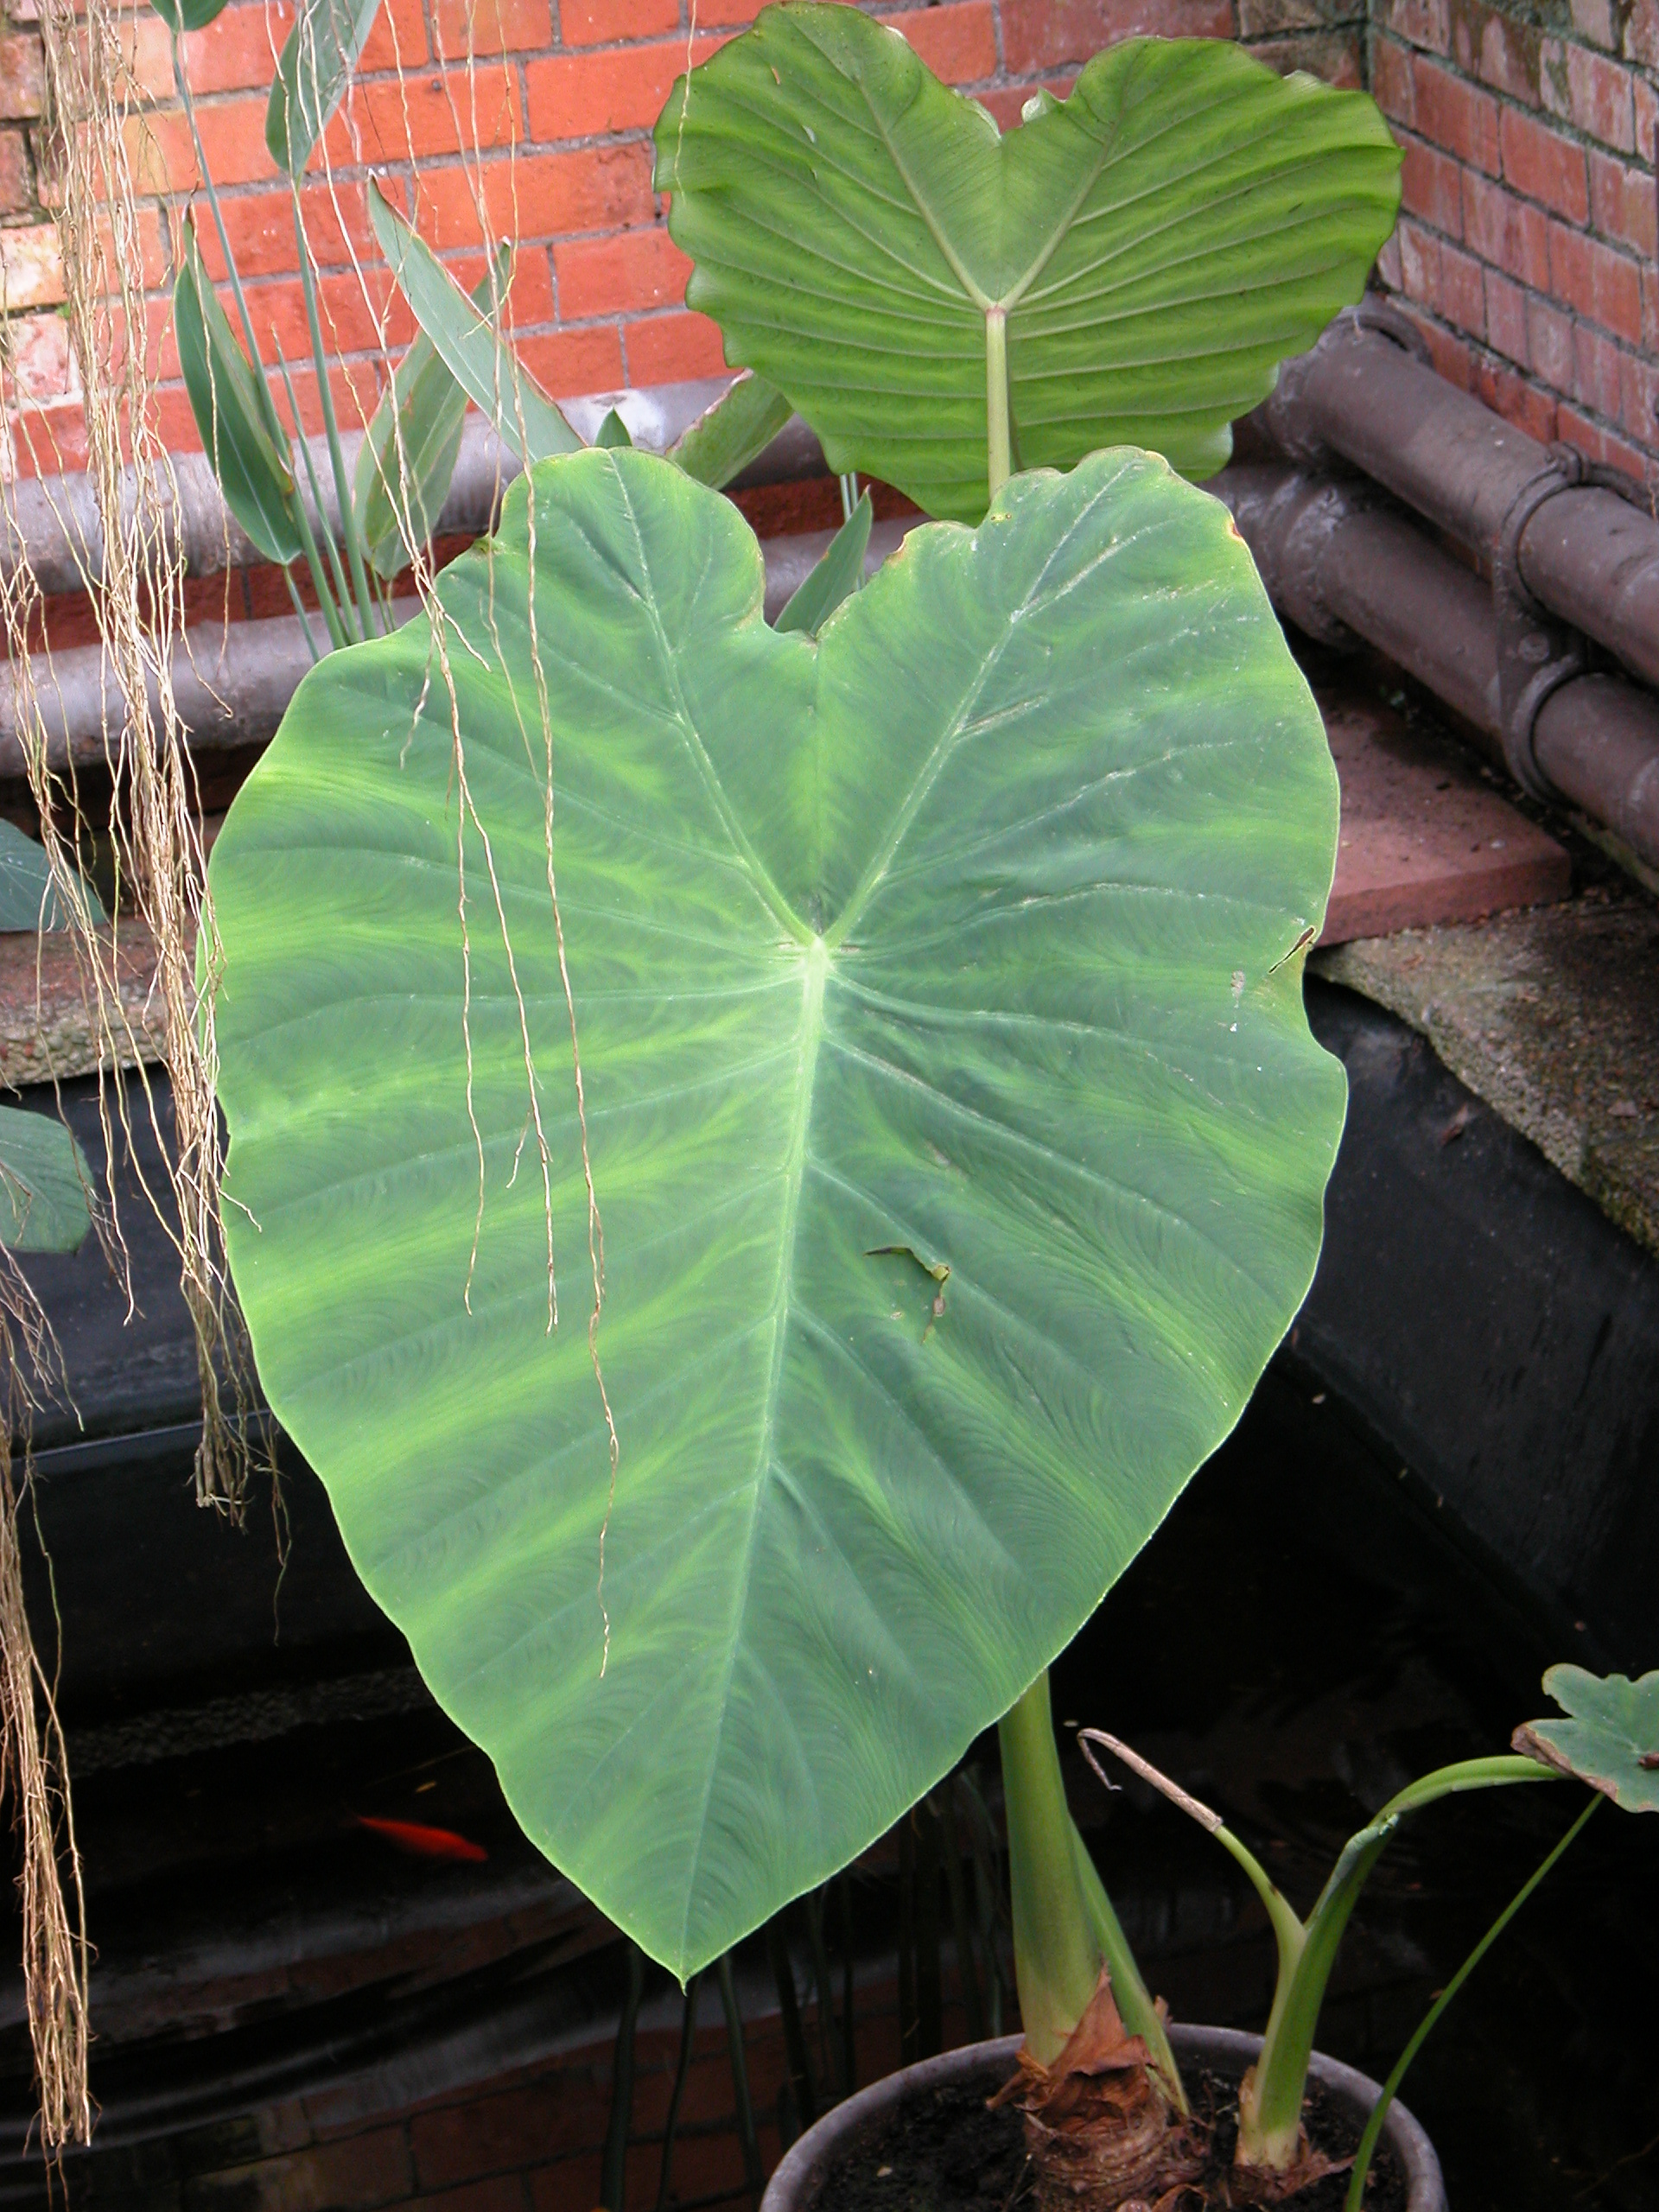 Image*After : photos : big leaf tropical plant in water green